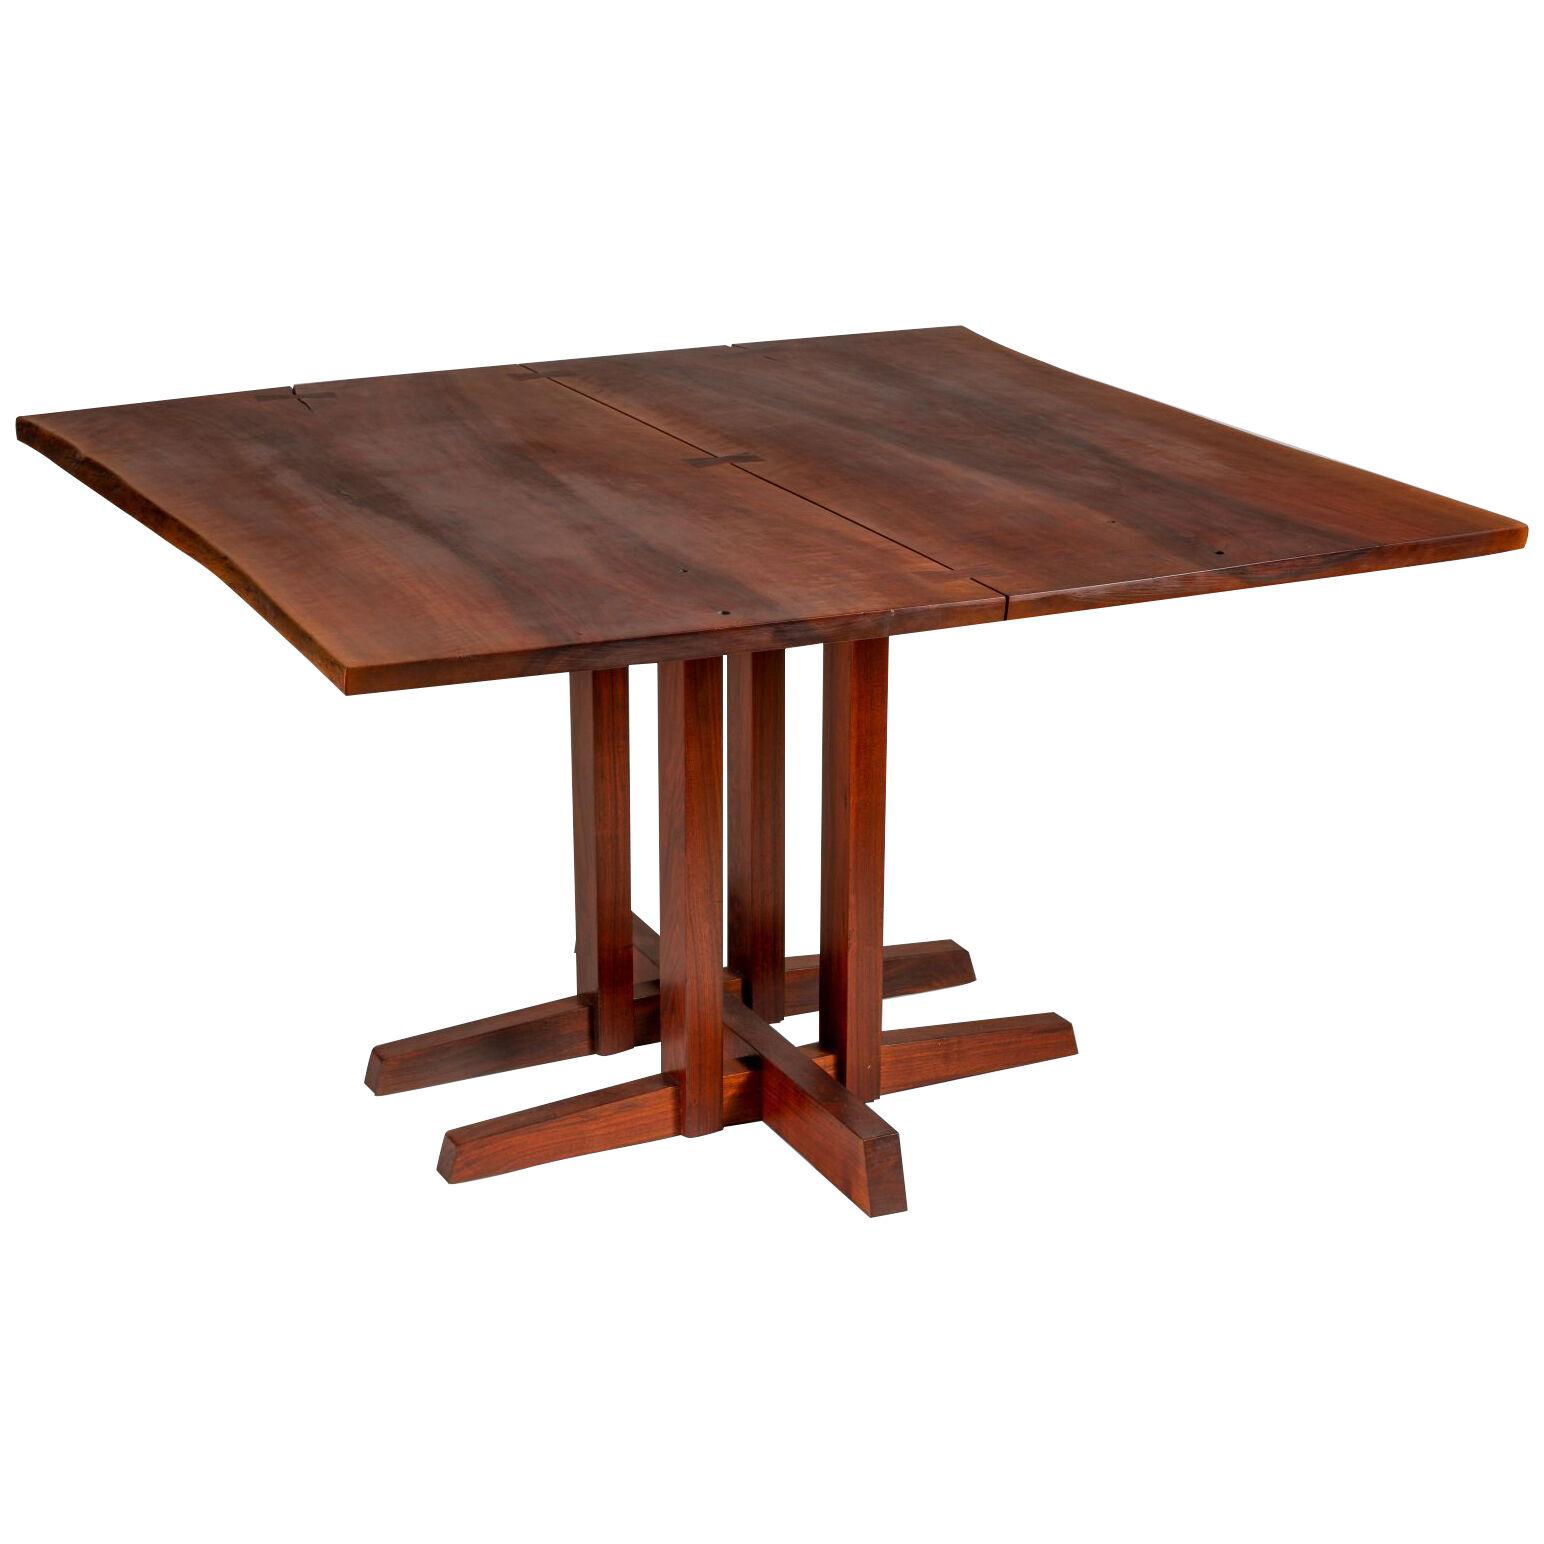 Frenchman's Cove Square Table